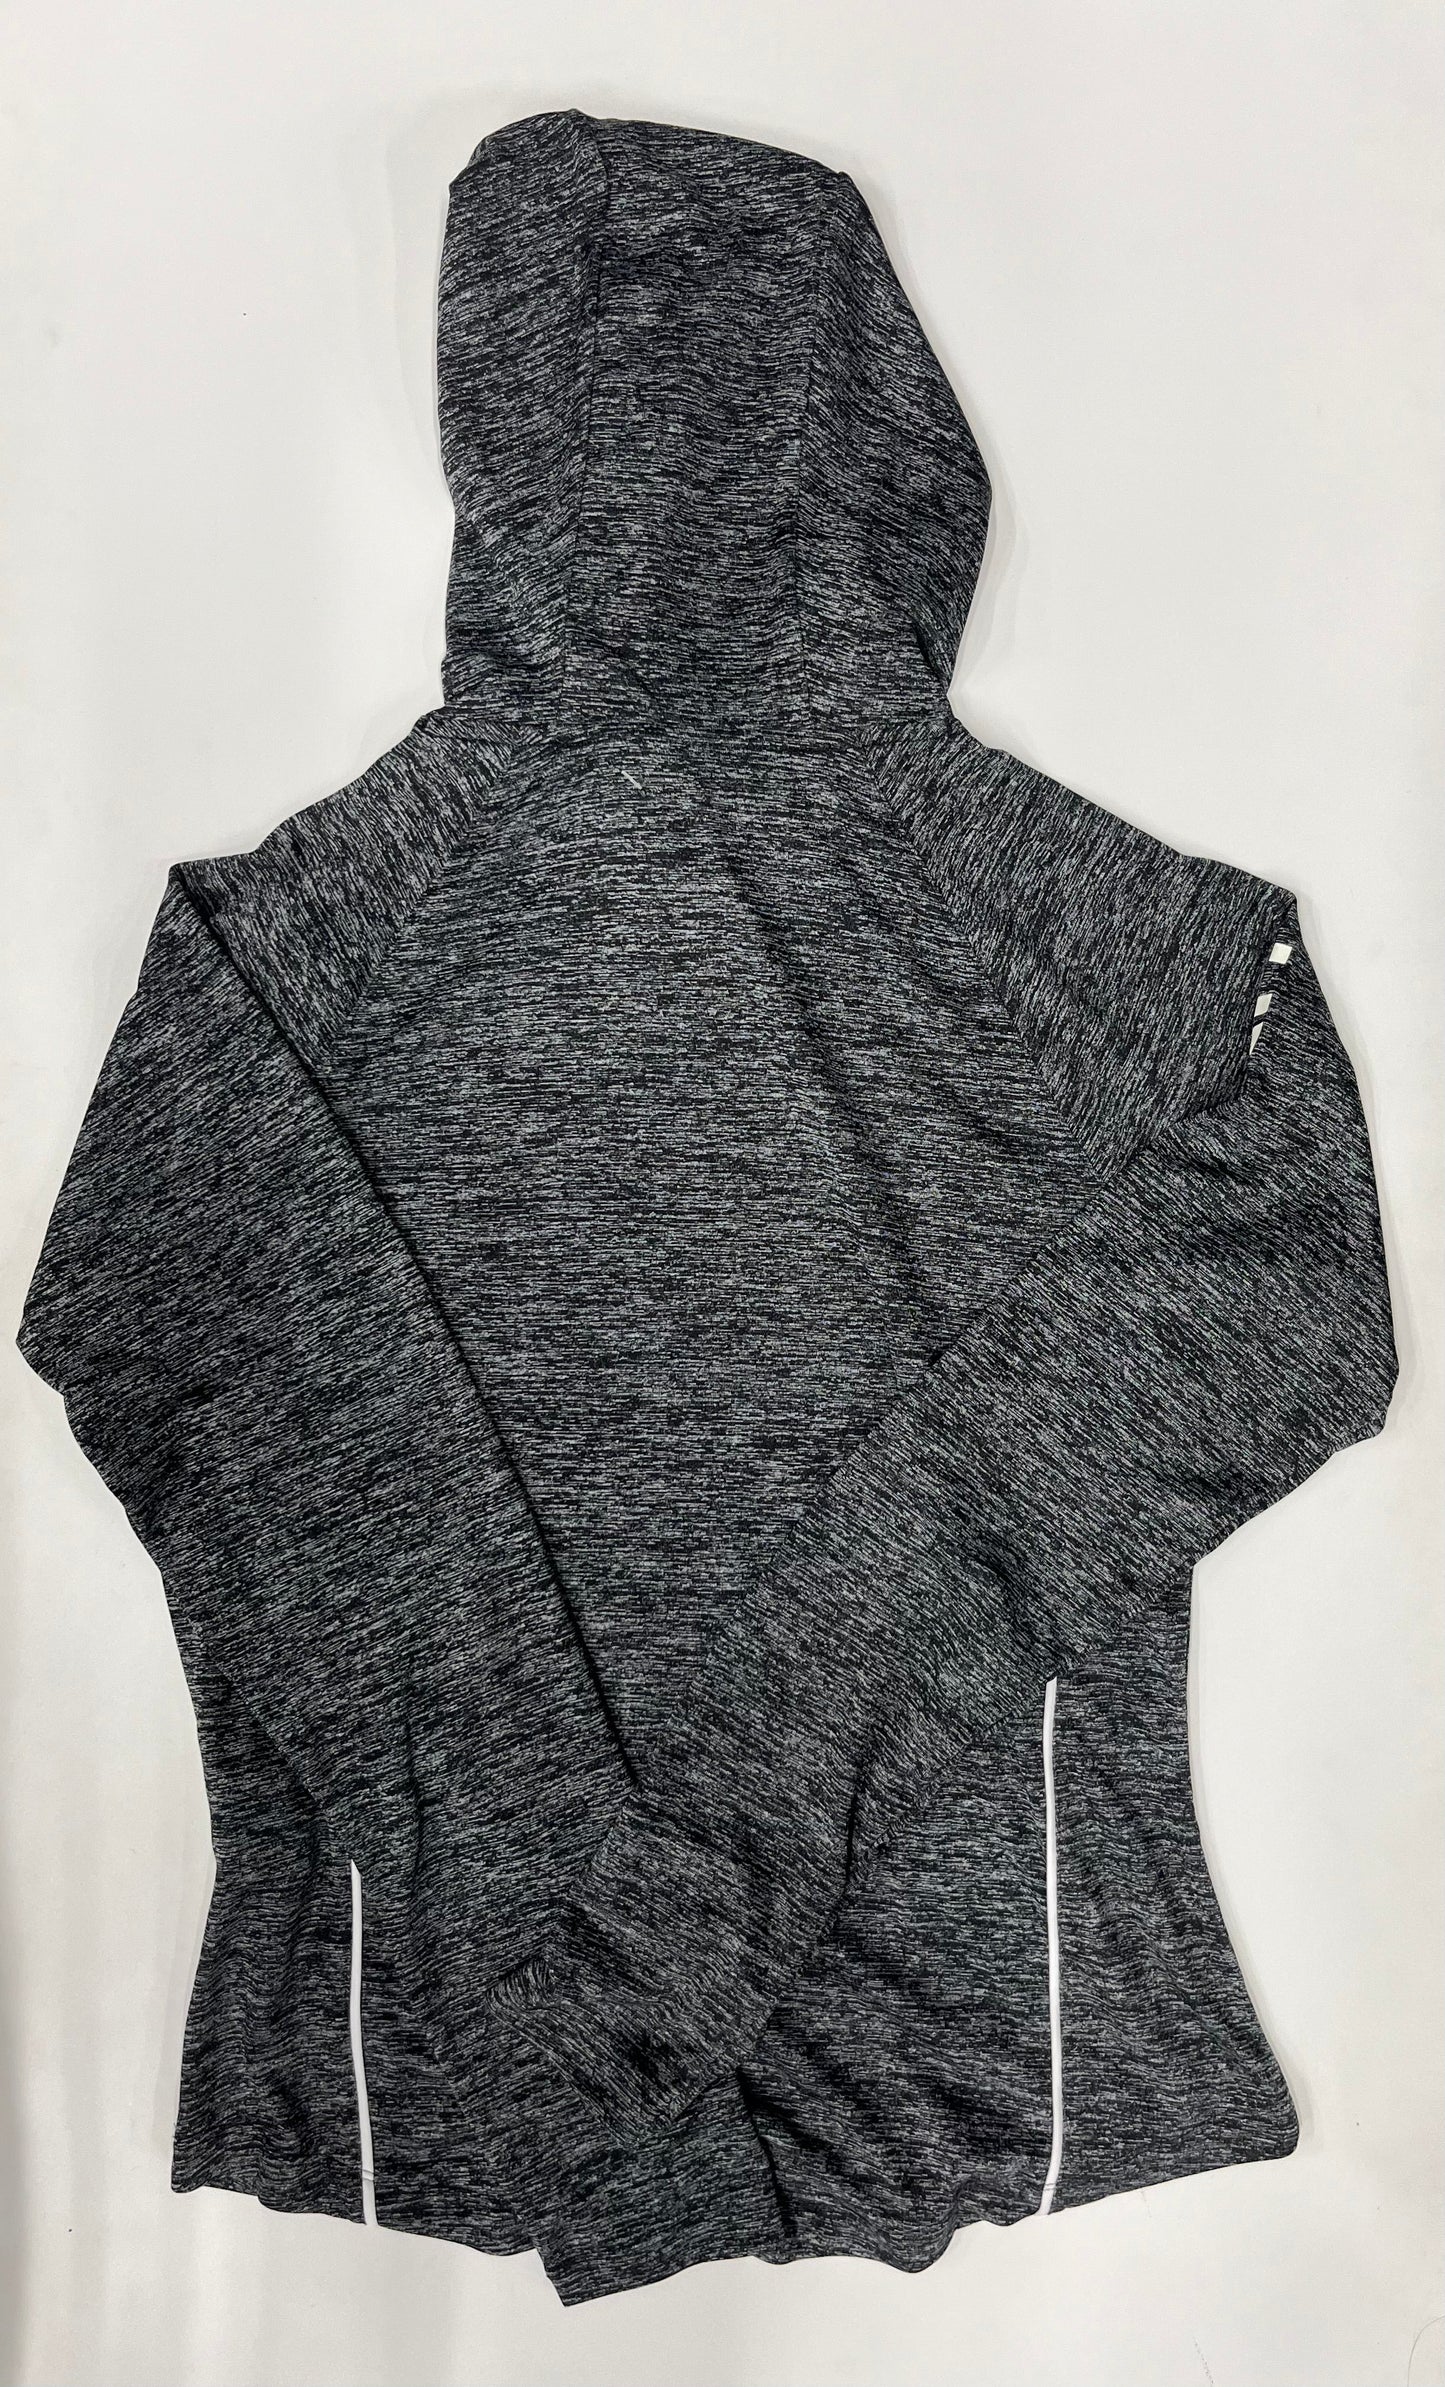 Athletic Sweatshirt Hoodie By Under Armour NWT Size: M